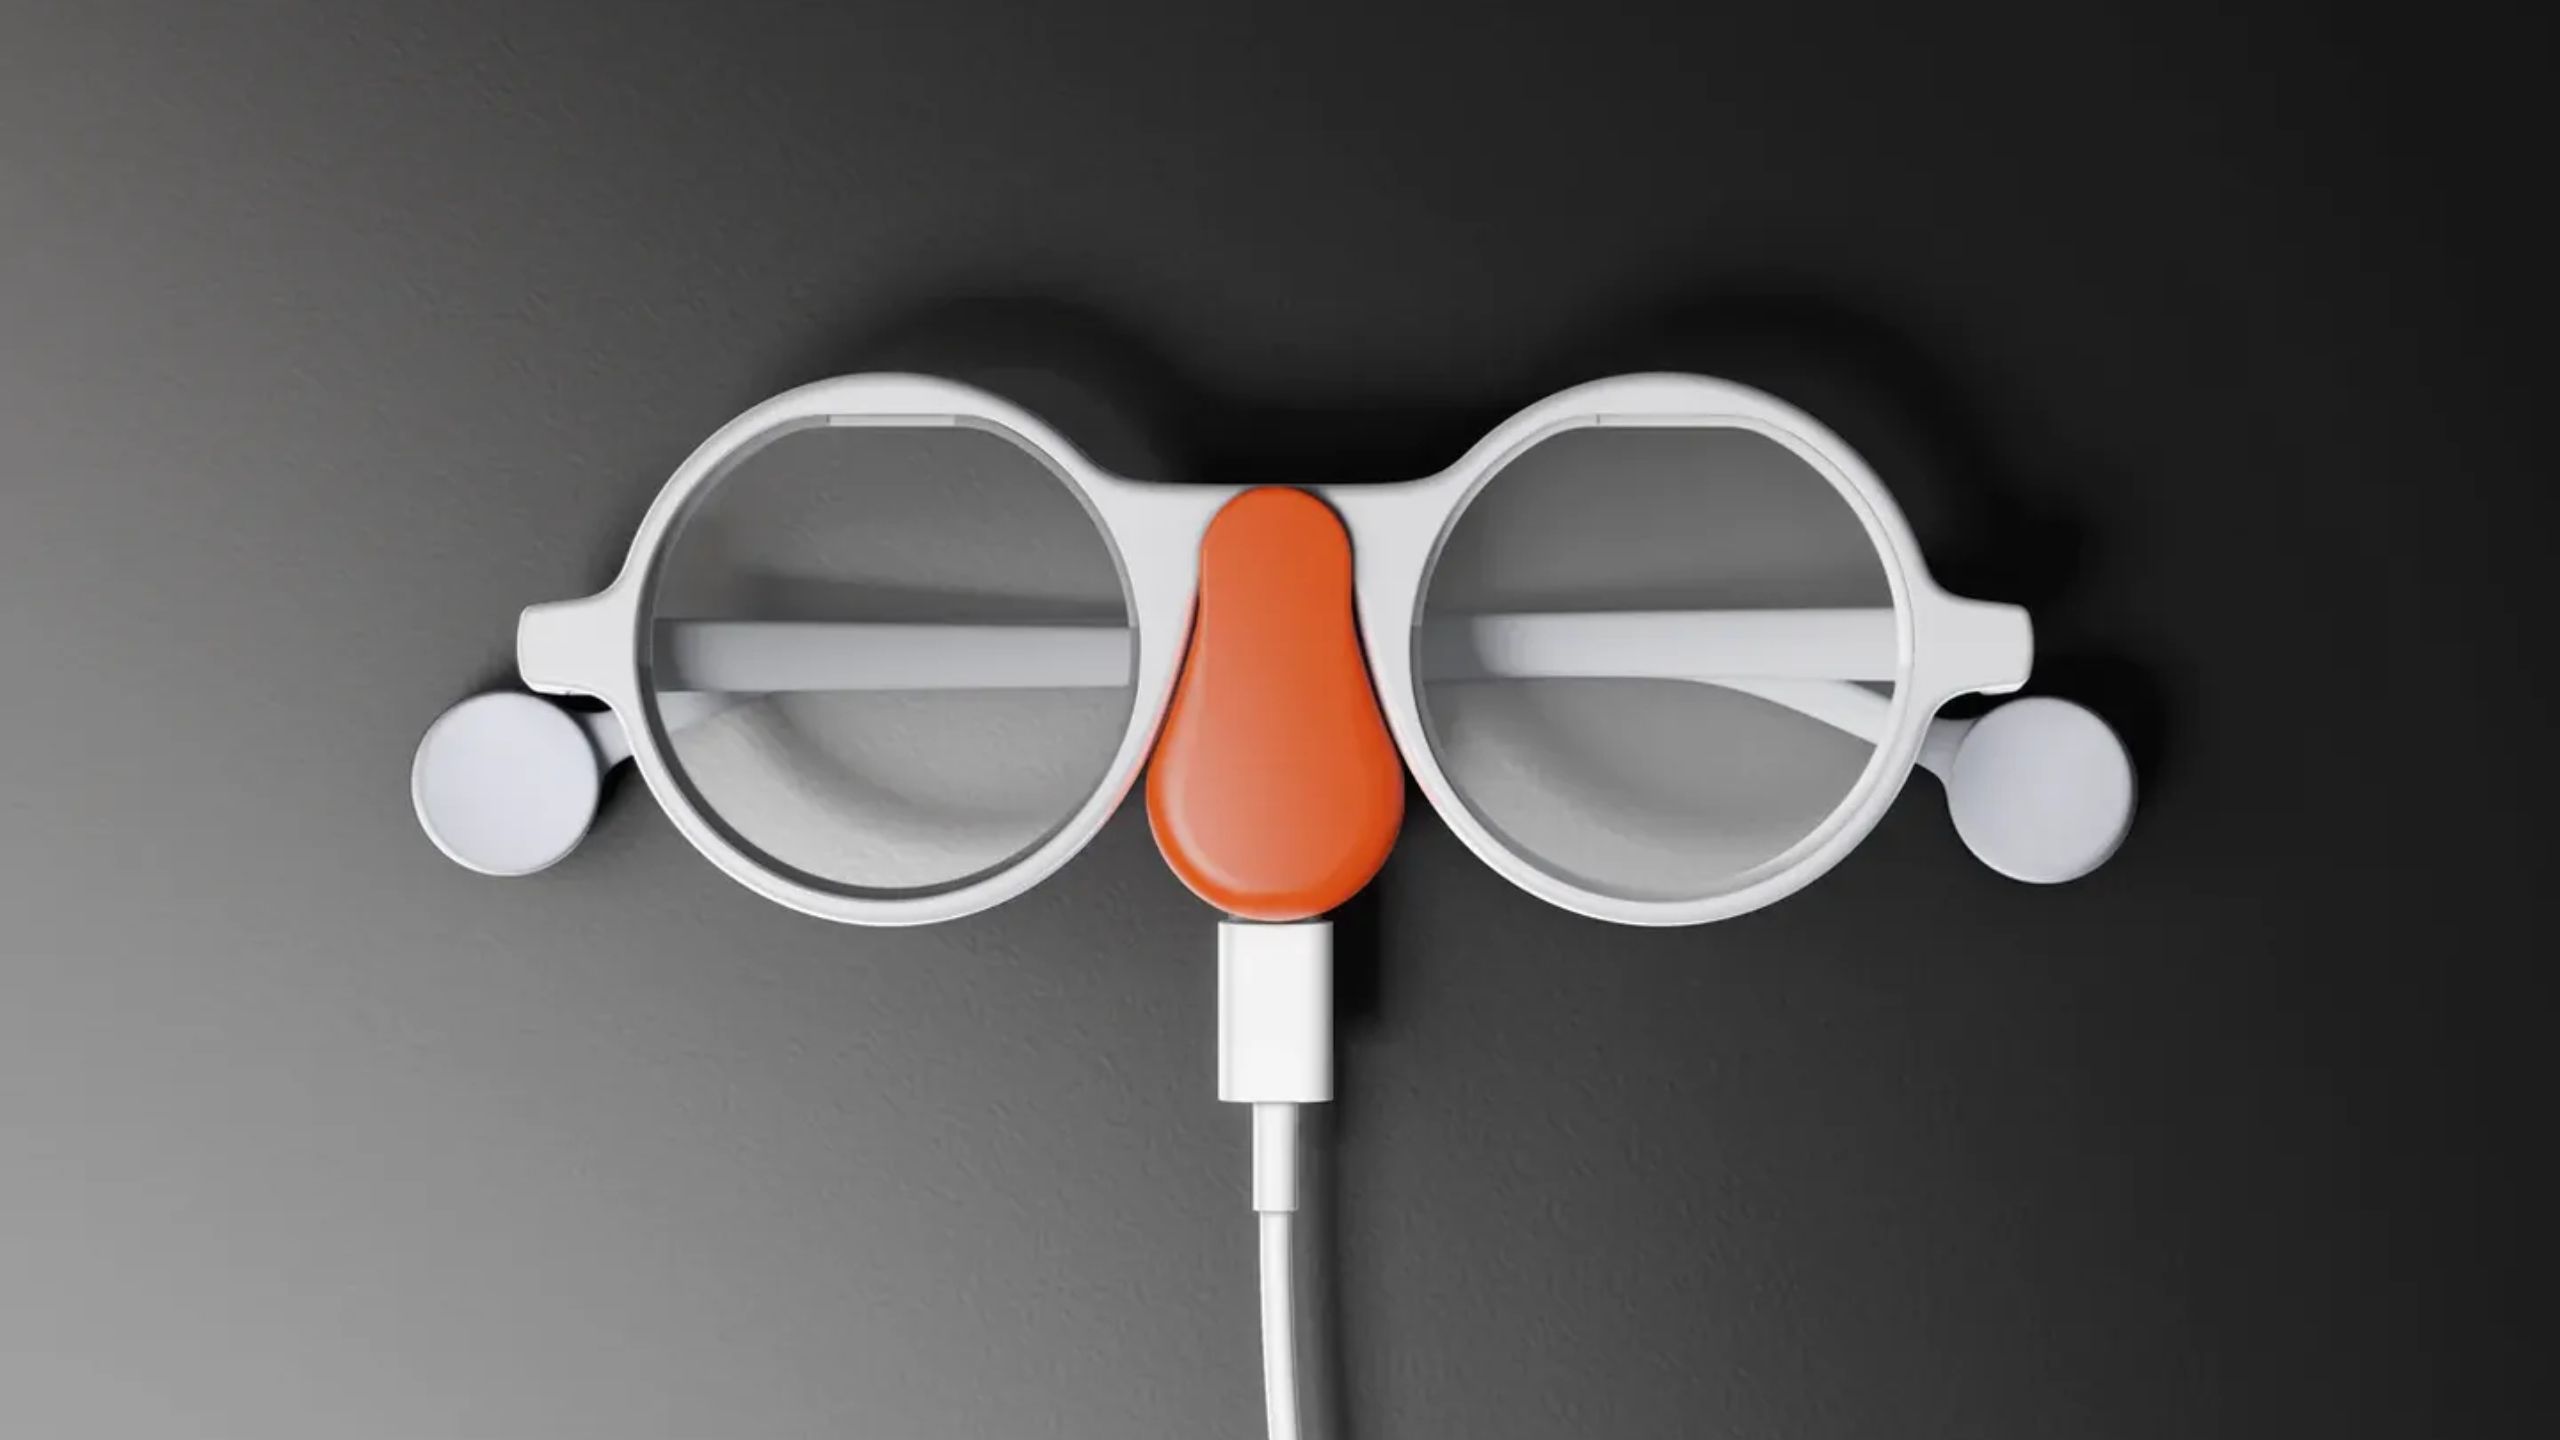 Round AR glasses with a charging clip attached.